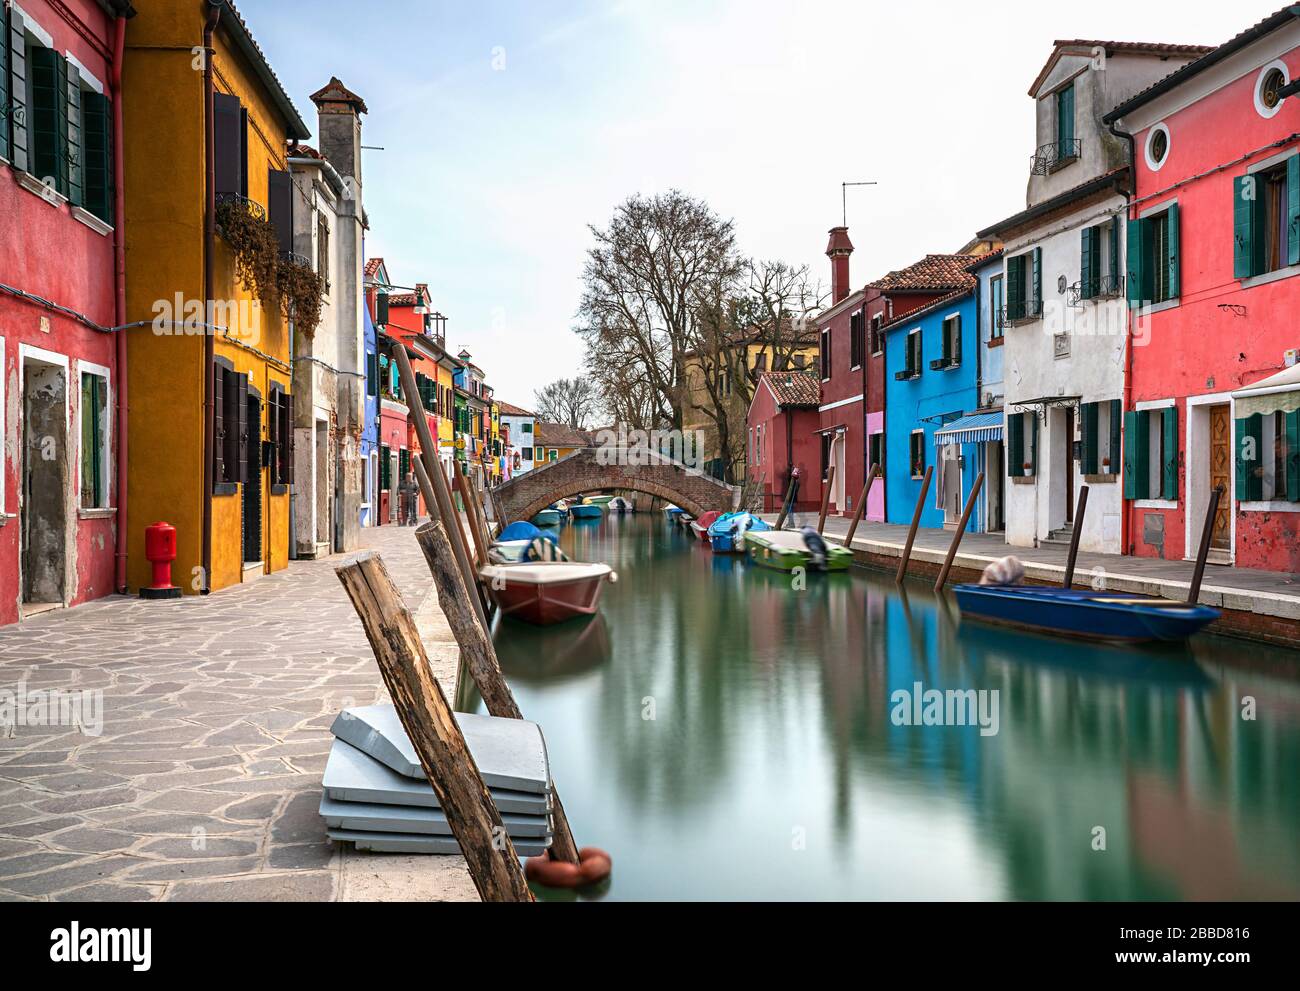 Italy; Venice; burano; colorful houses, restaurants and water channels on the island near venice Stock Photo